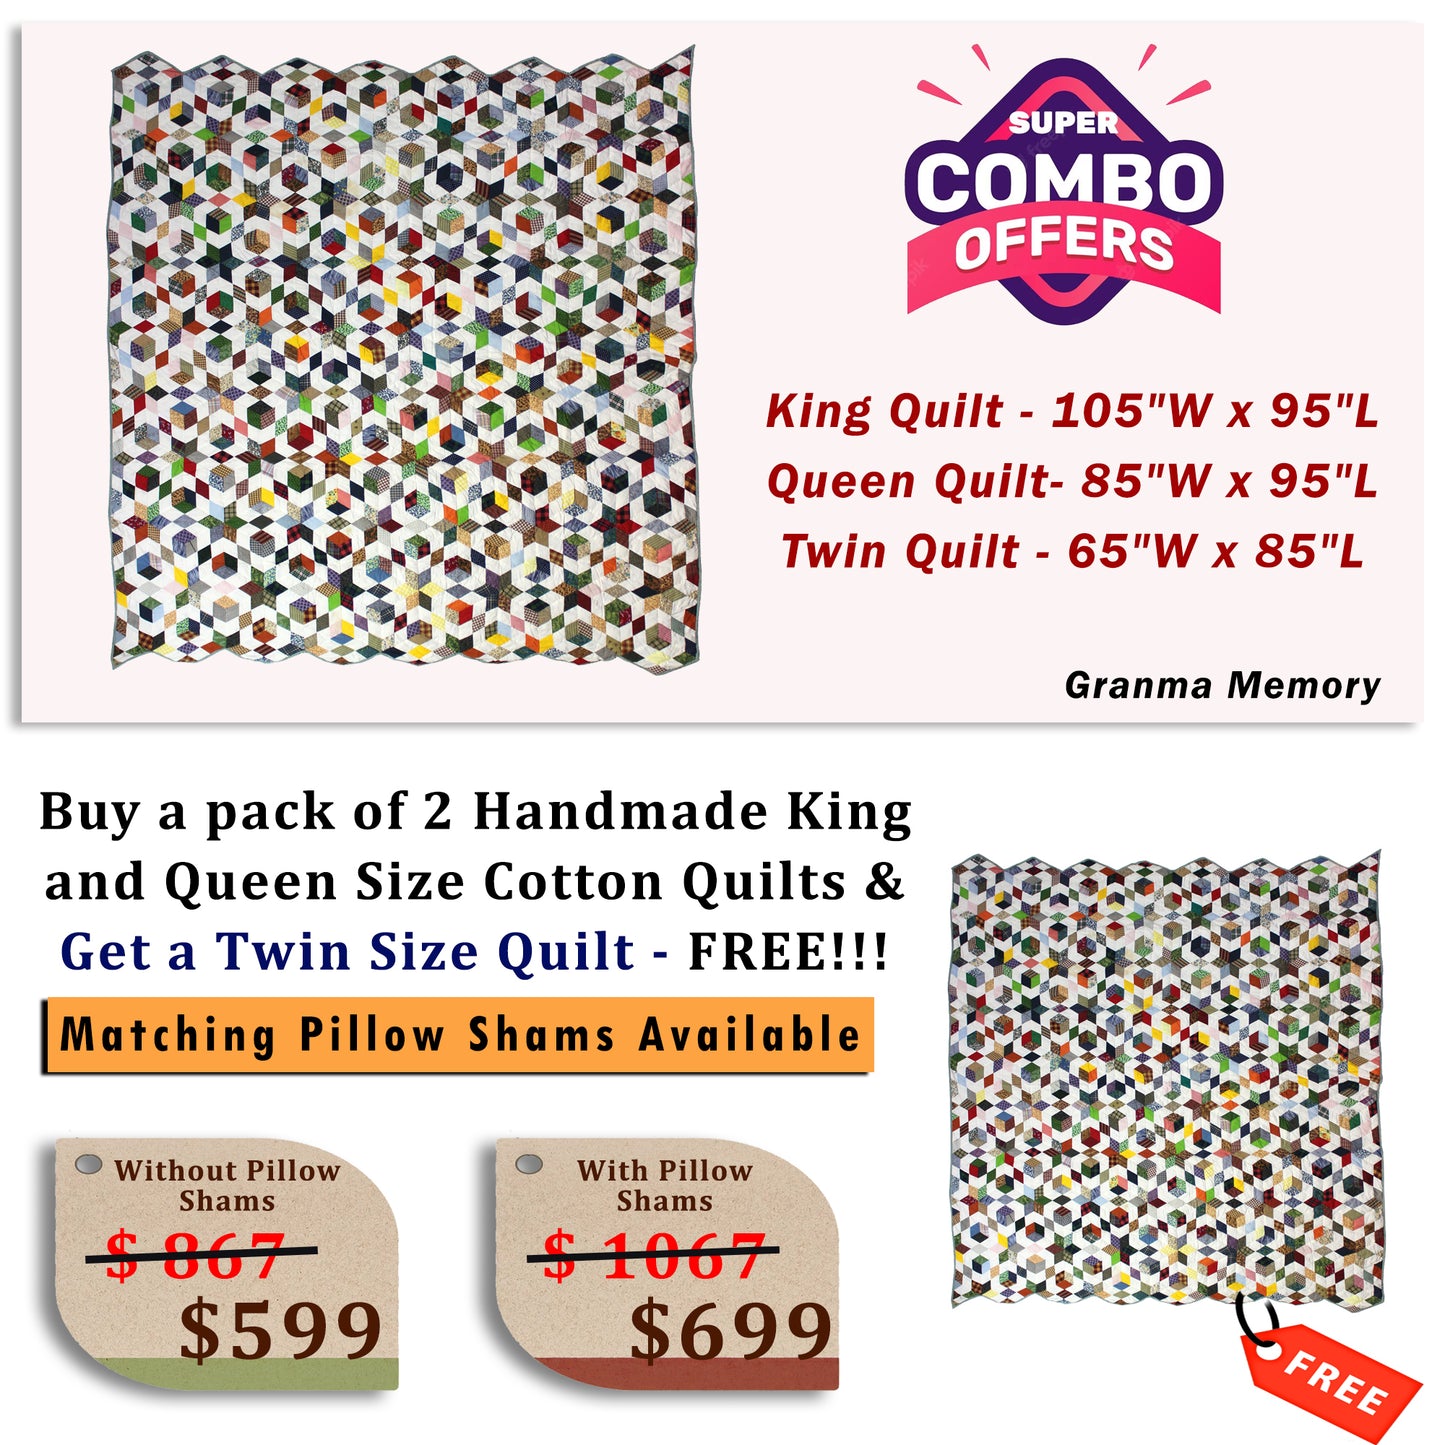 Granma Memory - Buy a pack of King and Queen Size Quilt, and get a Twin Size Quilt FREE!!!